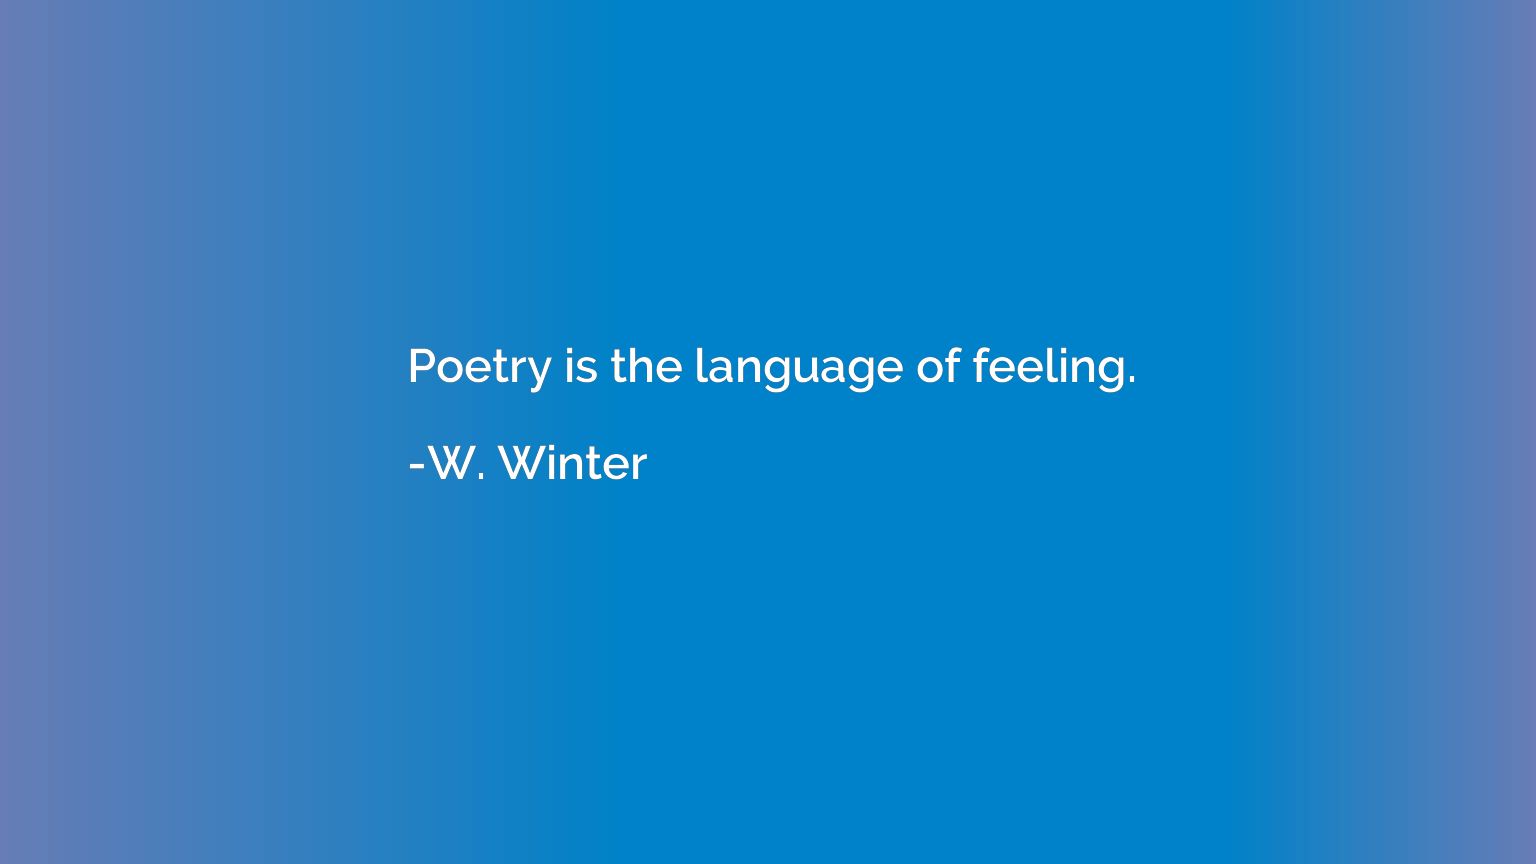 Poetry is the language of feeling.